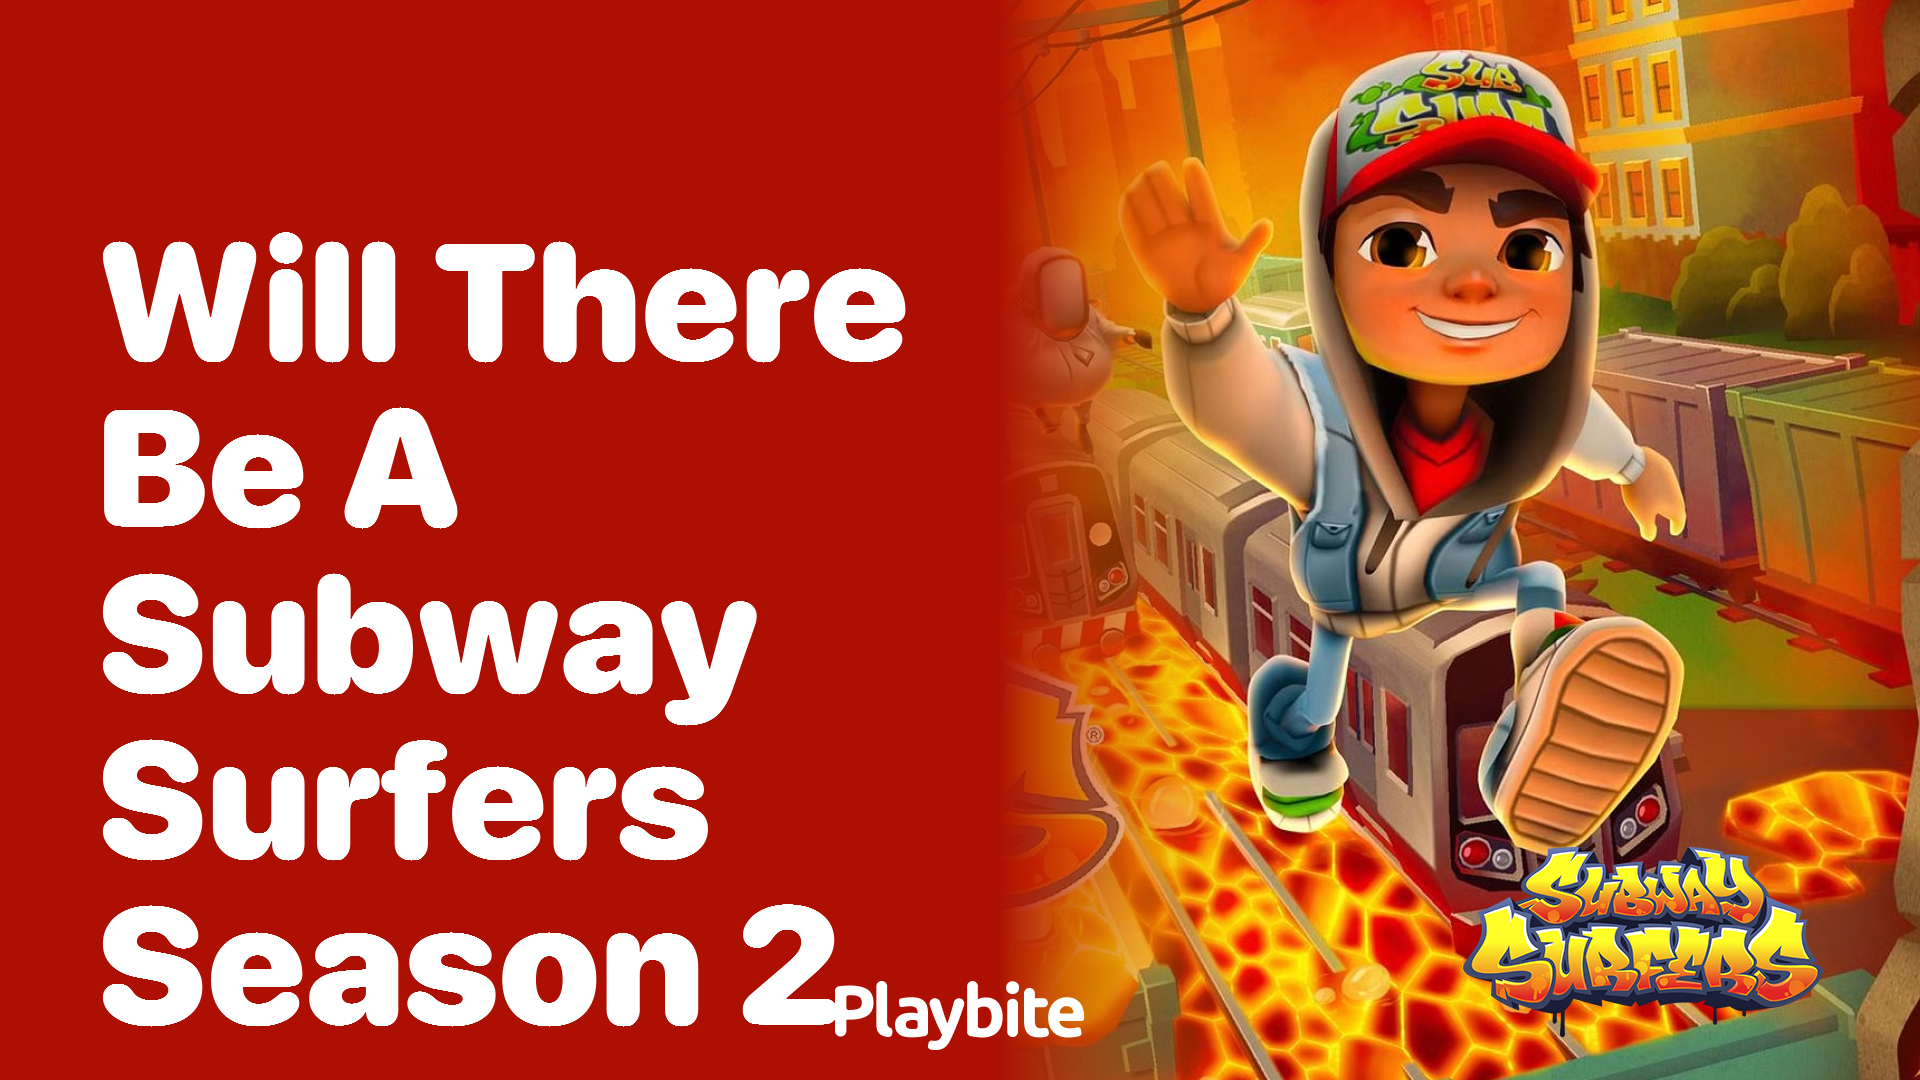 Will There Be a Subway Surfers Season 2?